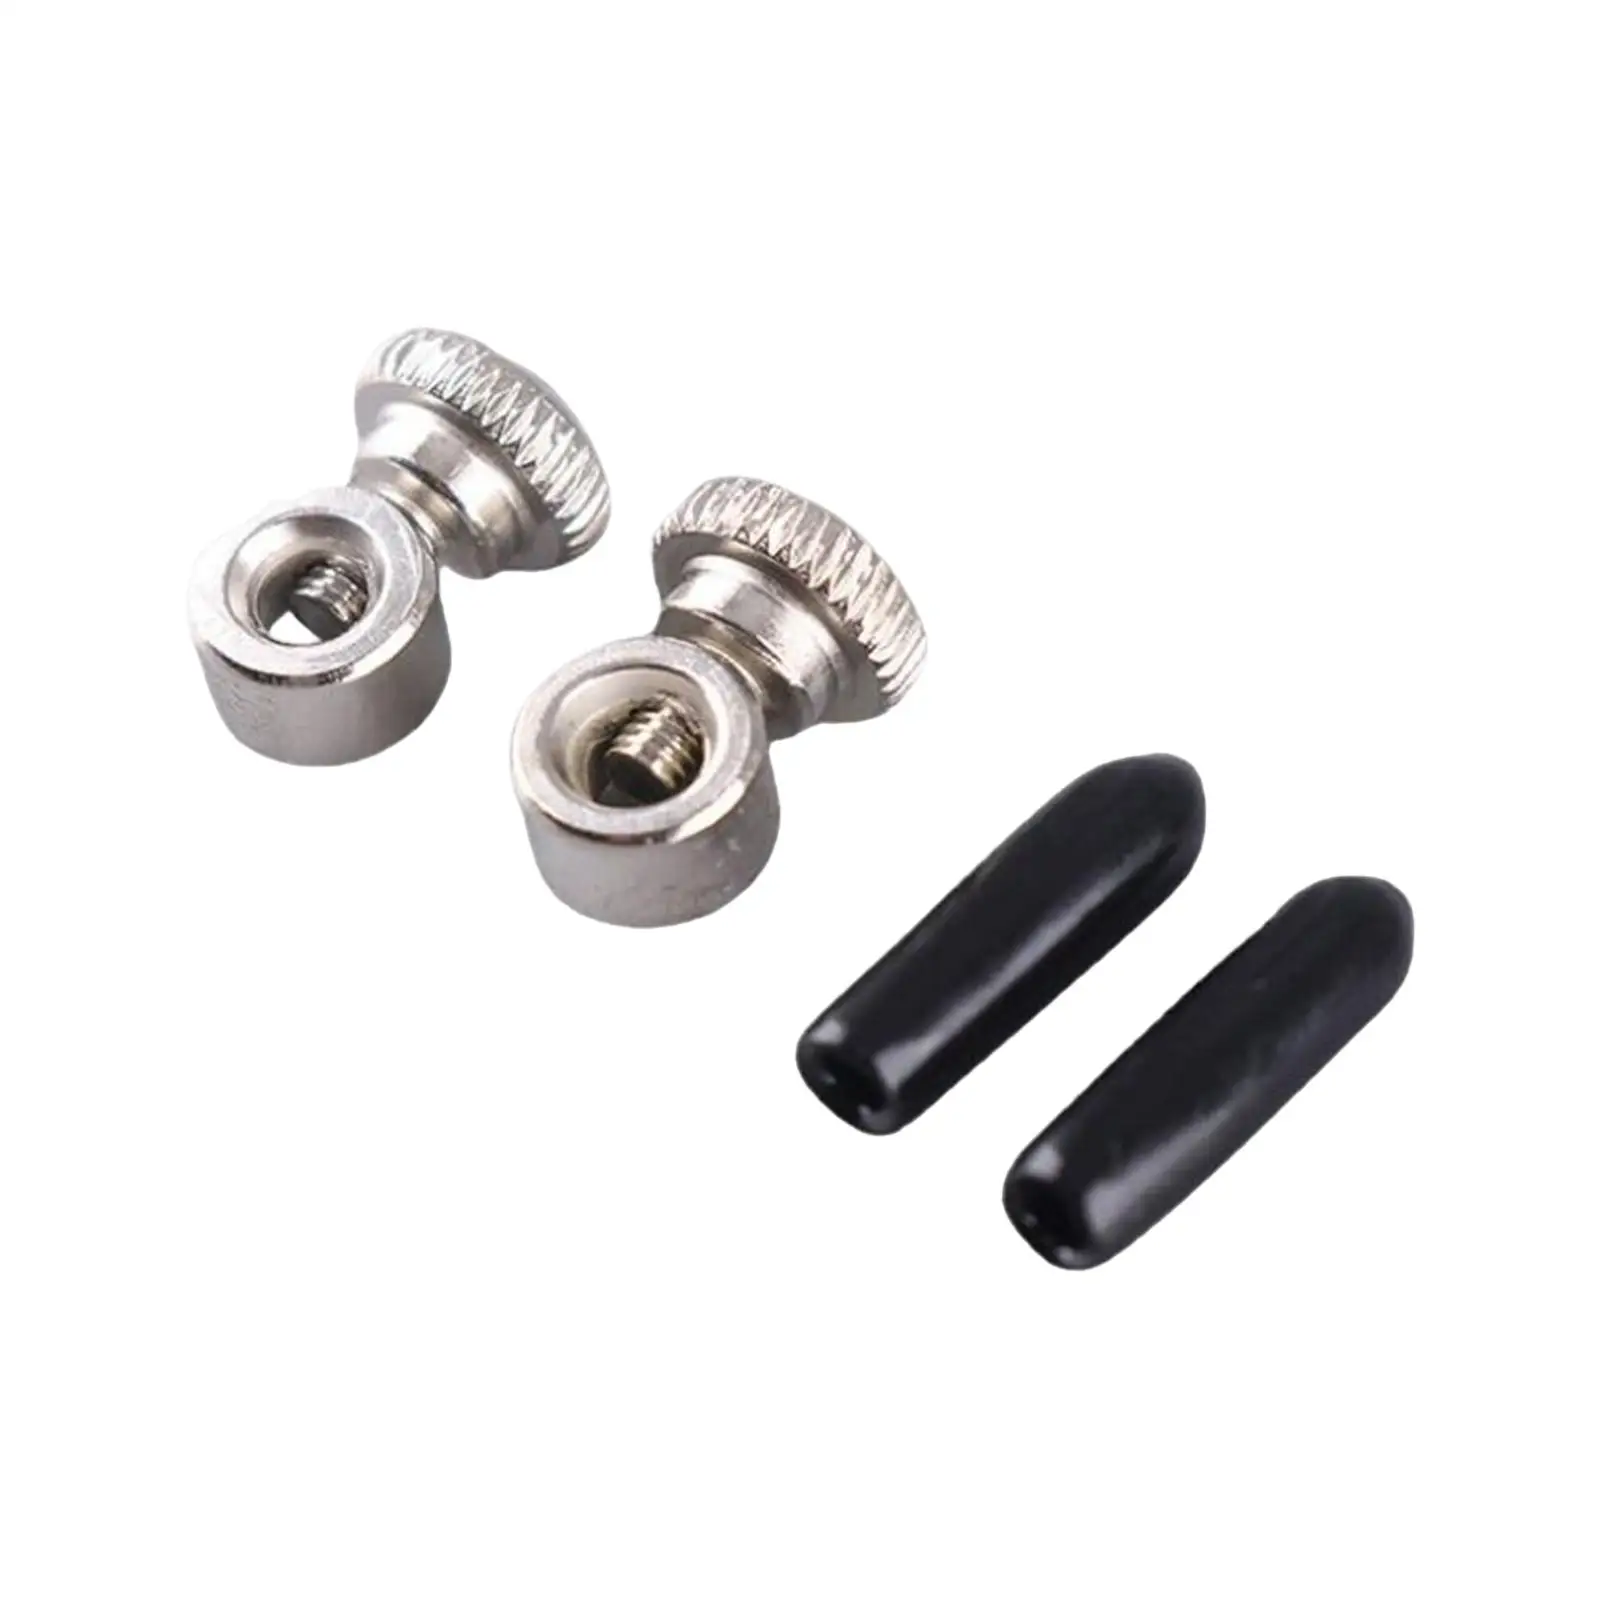 2 Pair Jump Rope Screws End Caps Set Cable Length Adjuster Parts Hardware Adjustable Screws End Covers for Single Skip Rope